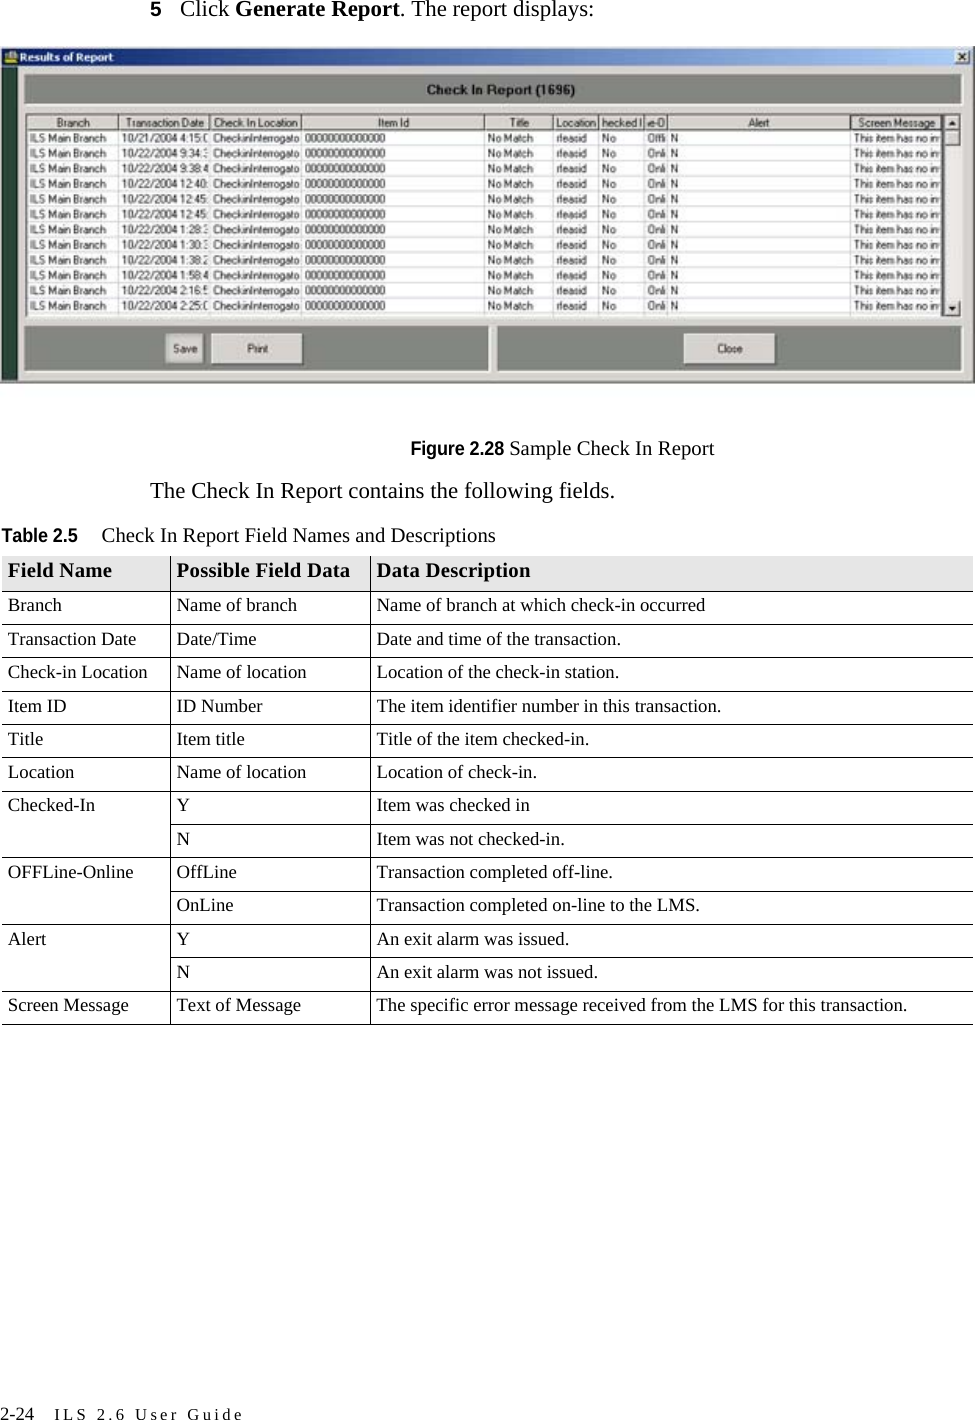 2-24 ILS 2.6 User Guide5Click Generate Report. The report displays:Figure 2.28 Sample Check In ReportThe Check In Report contains the following fields.Table 2.5Check In Report Field Names and DescriptionsField Name Possible Field Data Data DescriptionBranch Name of branch Name of branch at which check-in occurredTransaction Date Date/Time Date and time of the transaction.Check-in Location Name of location Location of the check-in station.Item ID ID Number The item identifier number in this transaction.Title Item title Title of the item checked-in.Location Name of location Location of check-in.Checked-In Y Item was checked inN Item was not checked-in.OFFLine-Online OffLine Transaction completed off-line.OnLine Transaction completed on-line to the LMS.Alert Y An exit alarm was issued.N An exit alarm was not issued.Screen Message Text of Message The specific error message received from the LMS for this transaction.